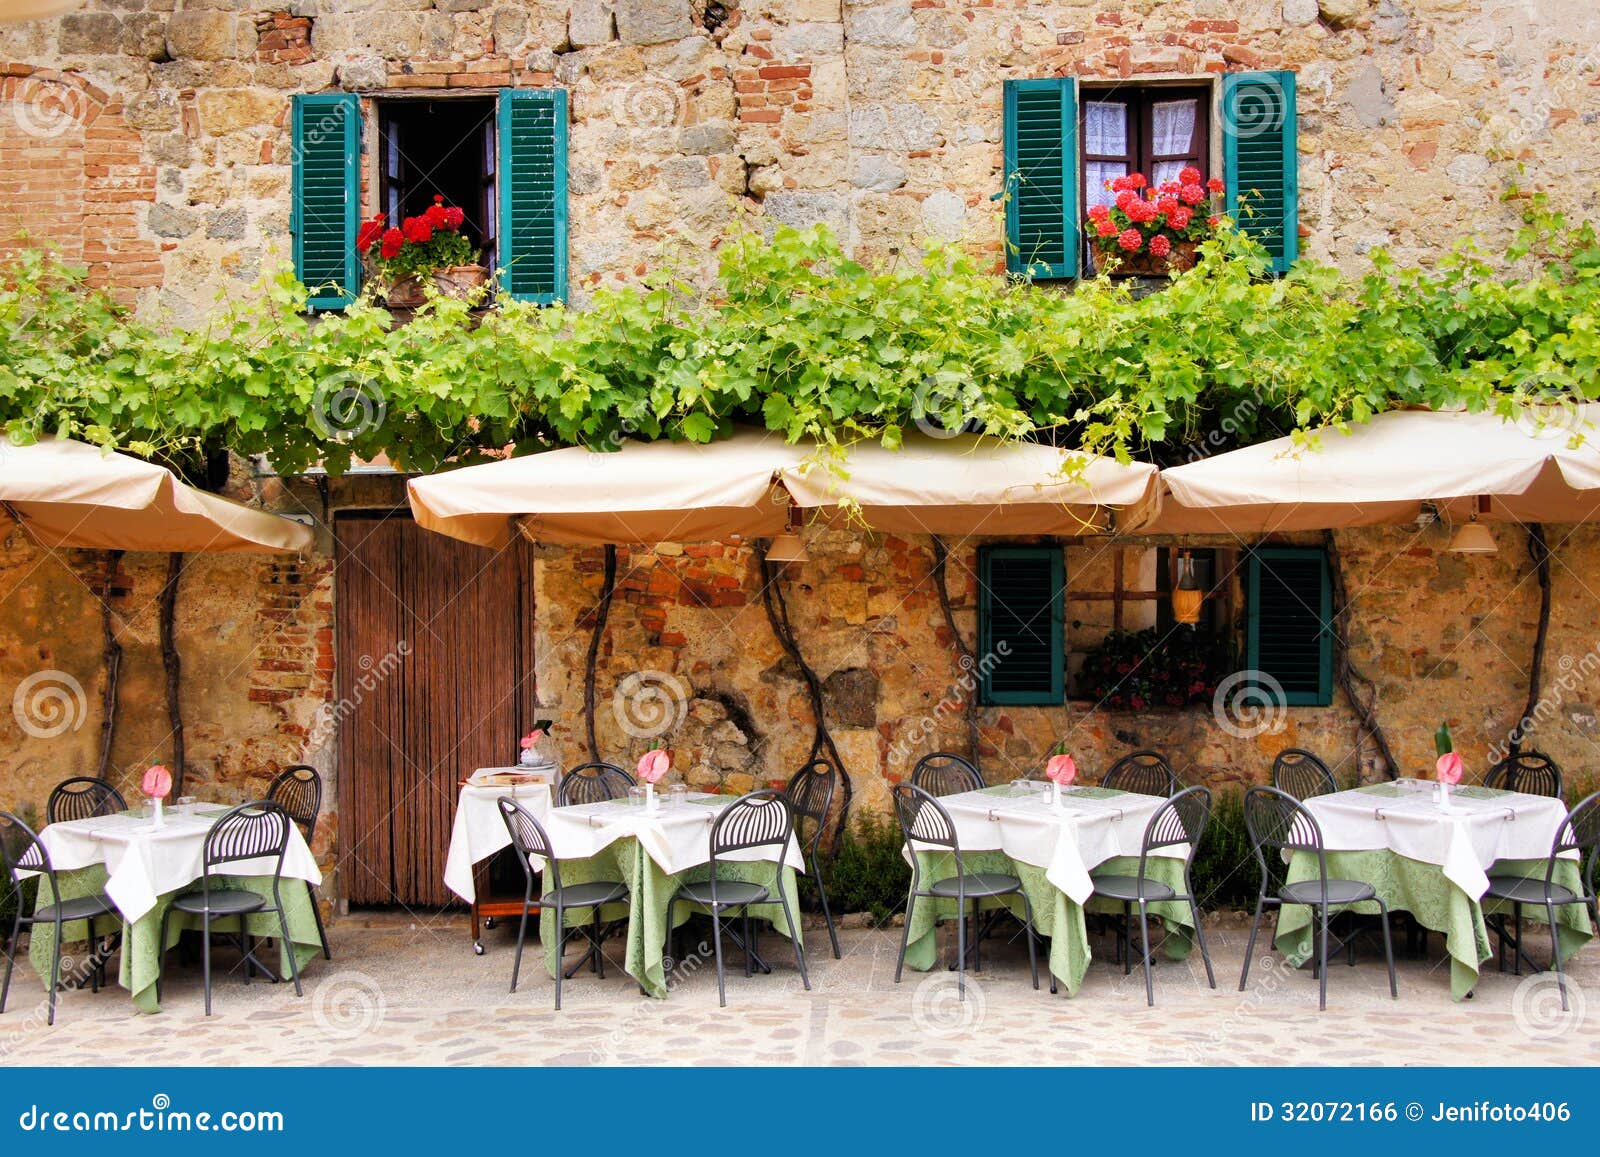 Cafe tables and chairs outside a quaint stone building in Tuscany 